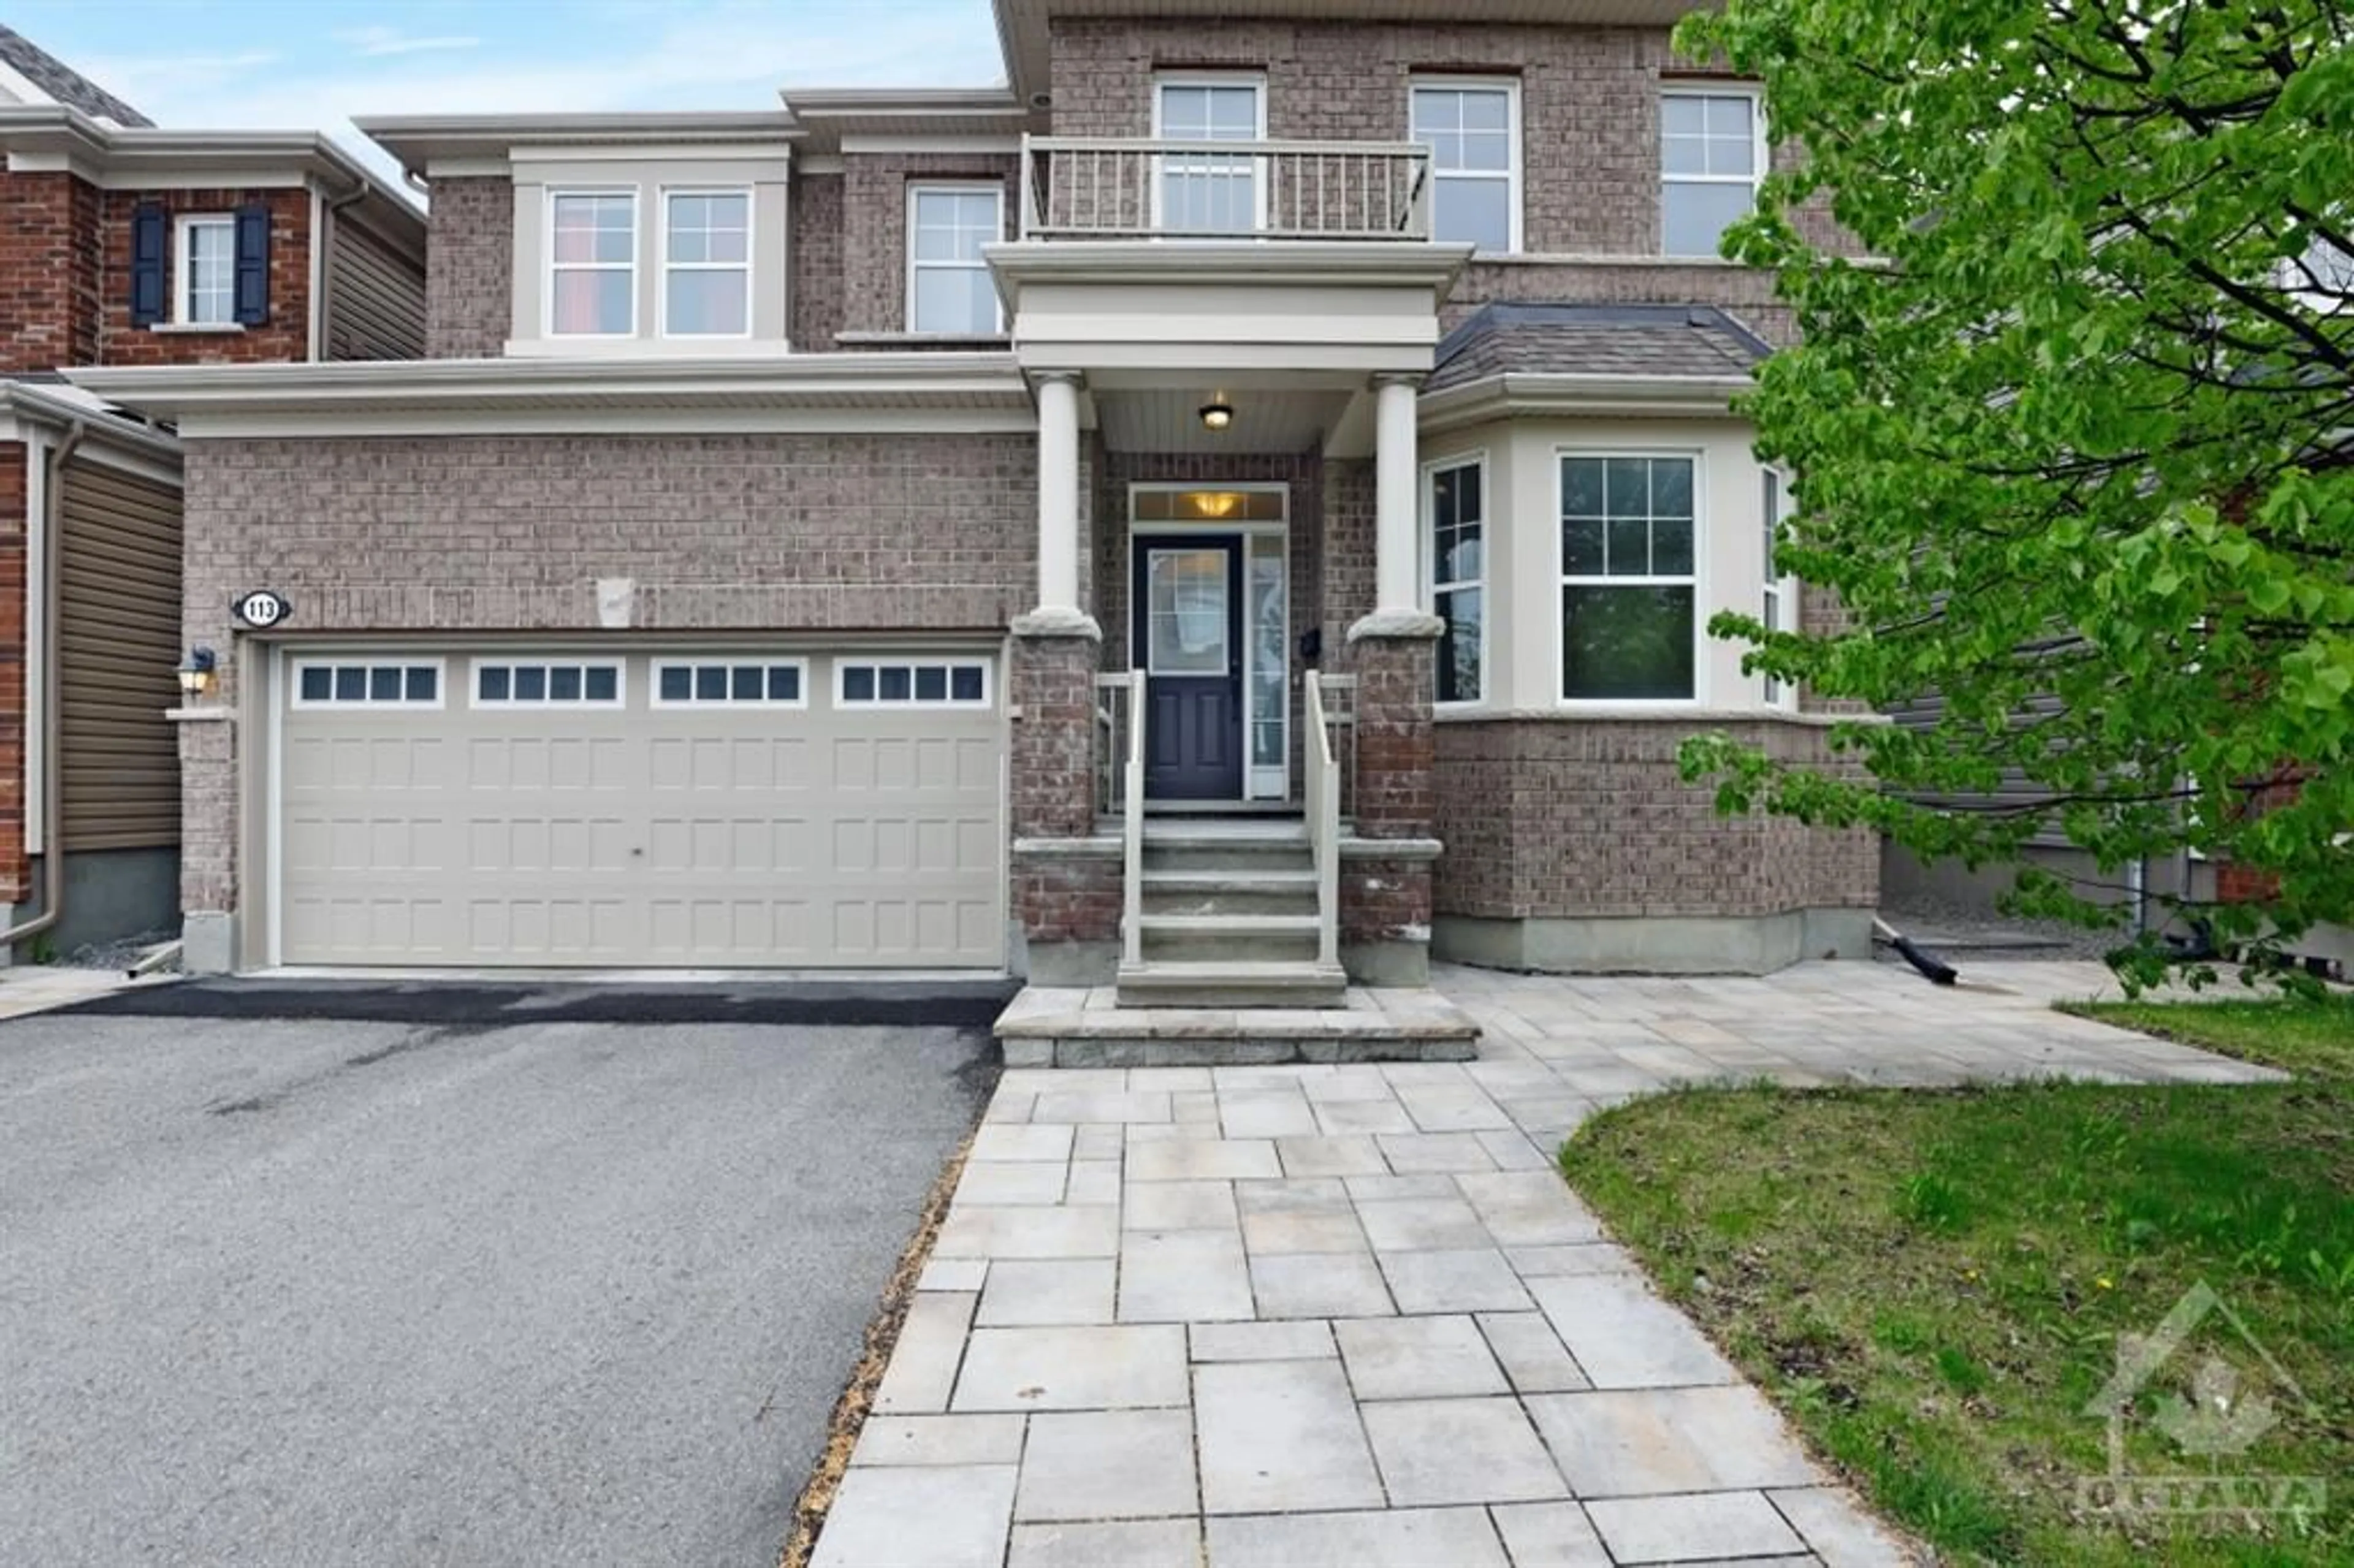 Home with brick exterior material for 113 LILY POND St, Ottawa Ontario K2M 0J3